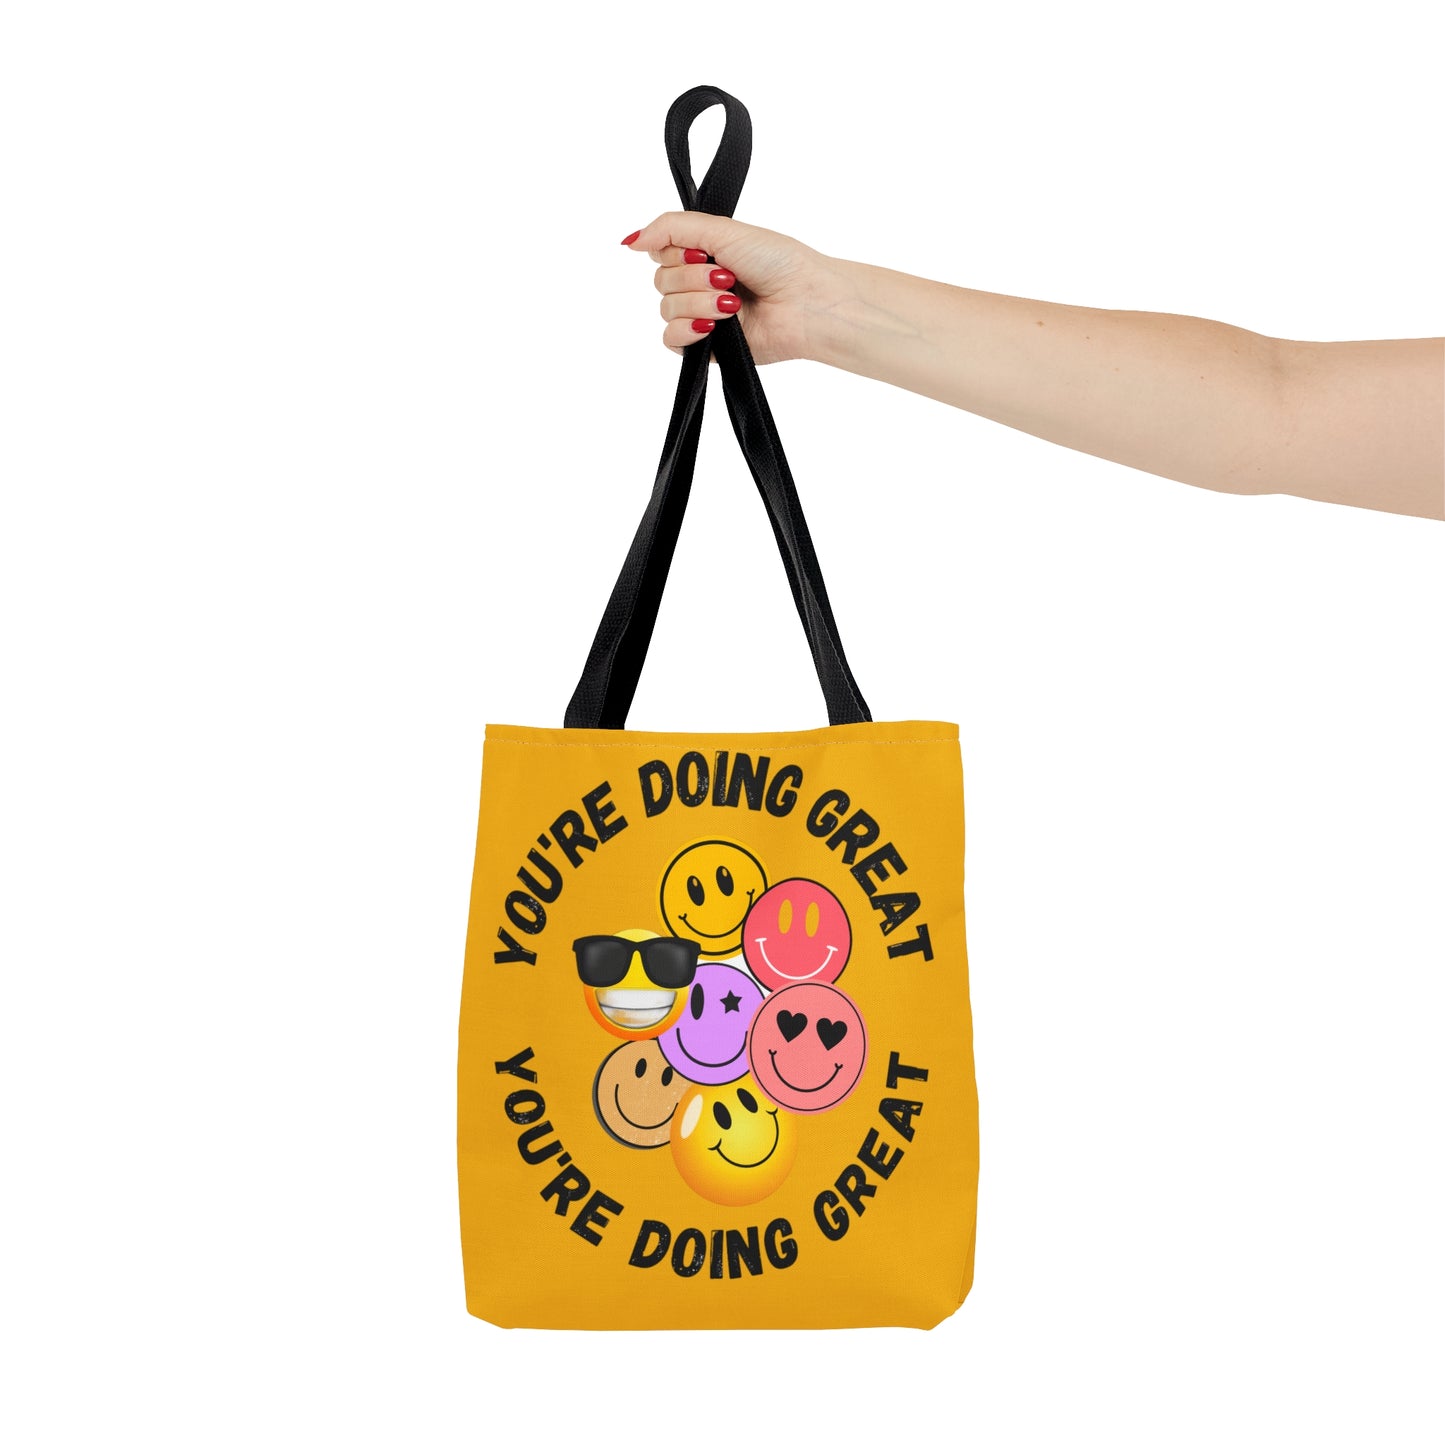 Positive feedback “YOU ARE DOING GREAT” makes us smile with this colorful Tote Bag in 3 sizes to meet your needs.